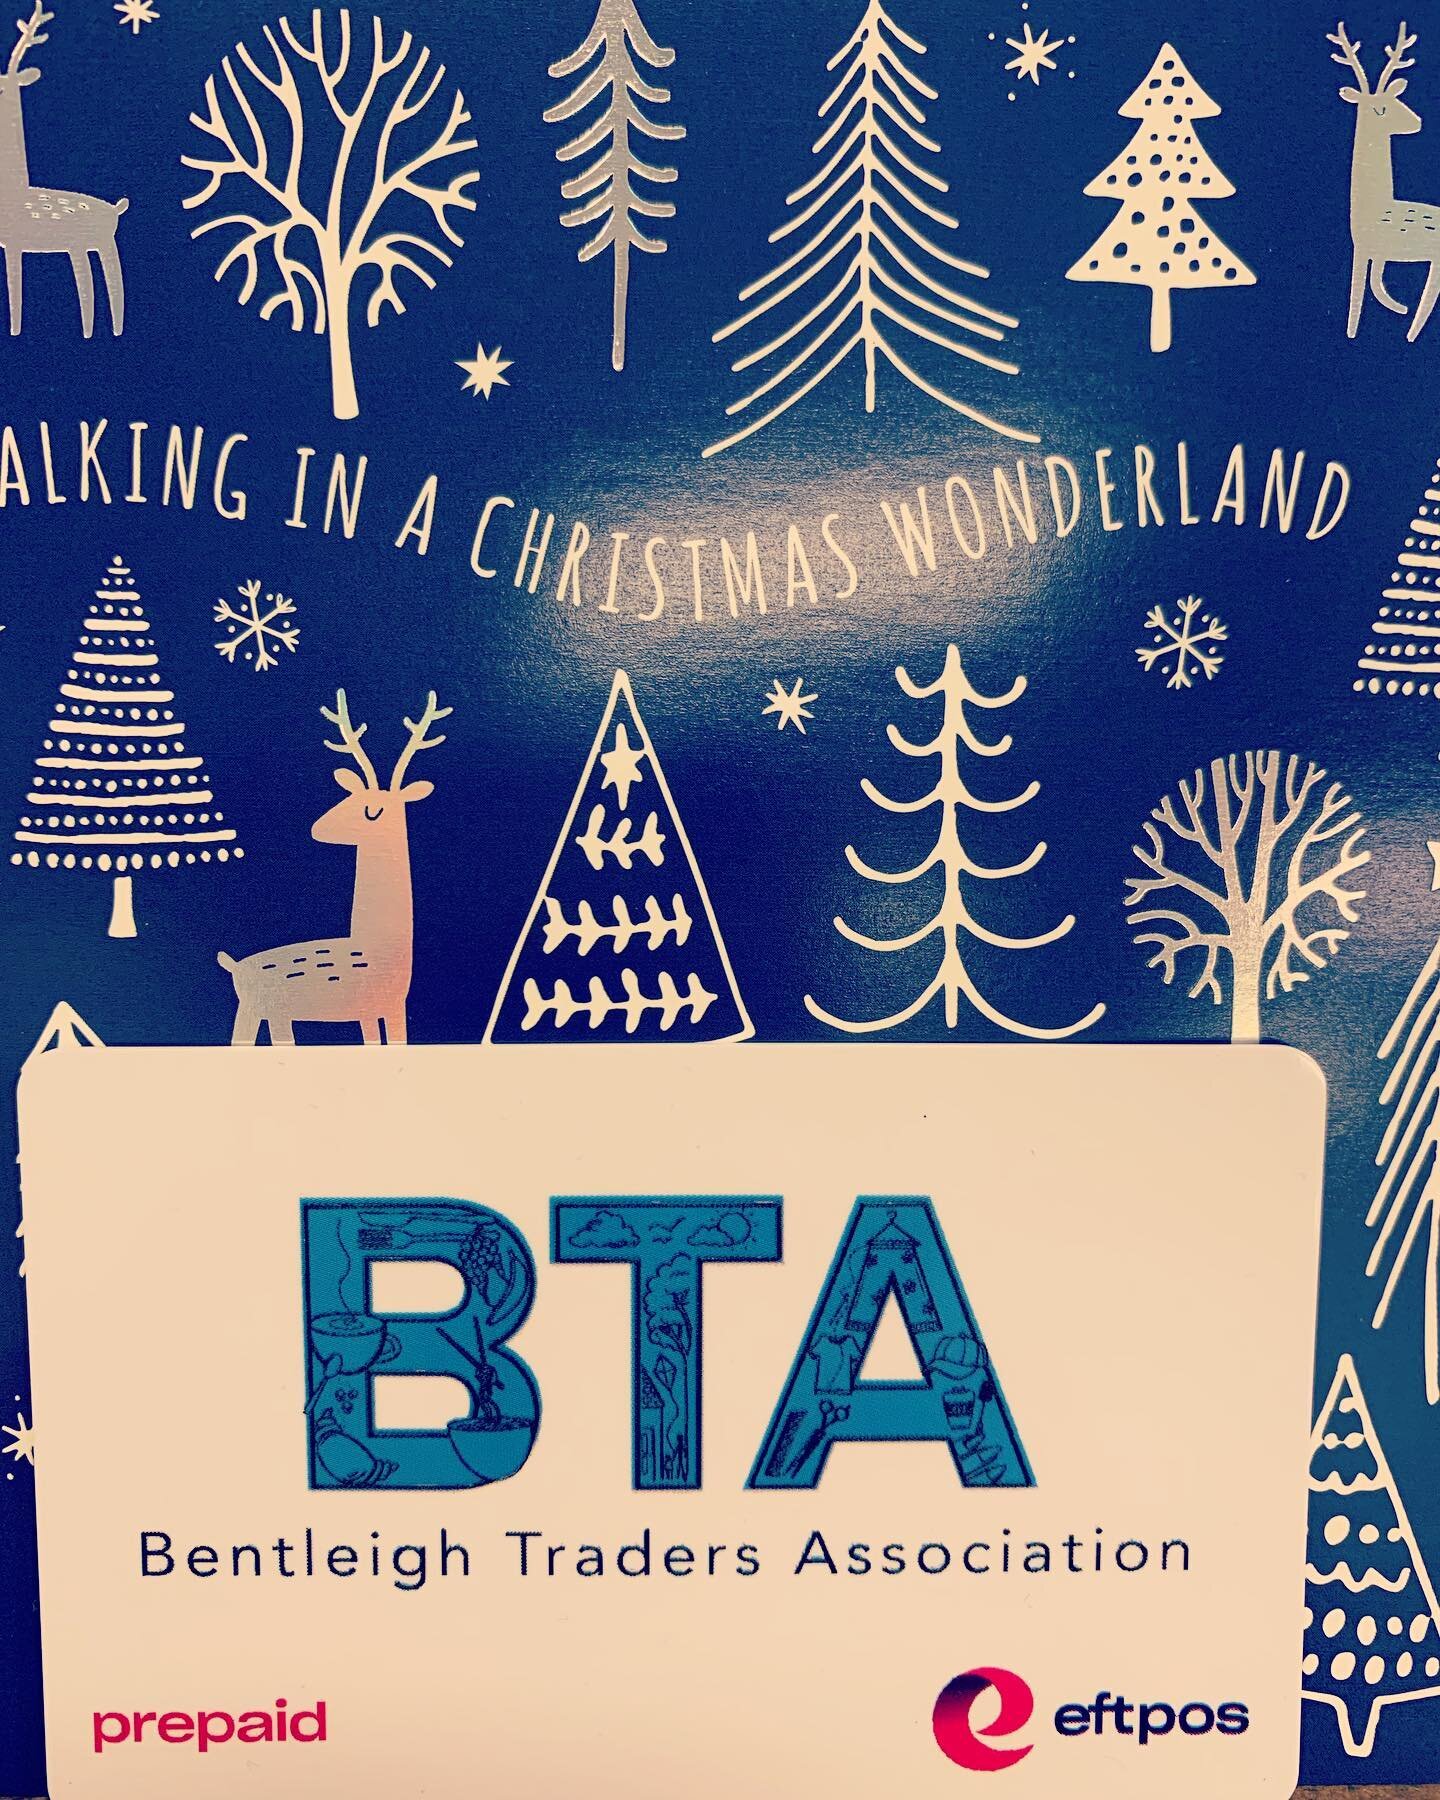 We are giving $50 gift cards purchased from Bentleigh Traders Association to anyone needing a helping hand this Christmas; enabling them to help out local businesses and celebrate Christmas with dignity. If you would like to donate or request a gift 